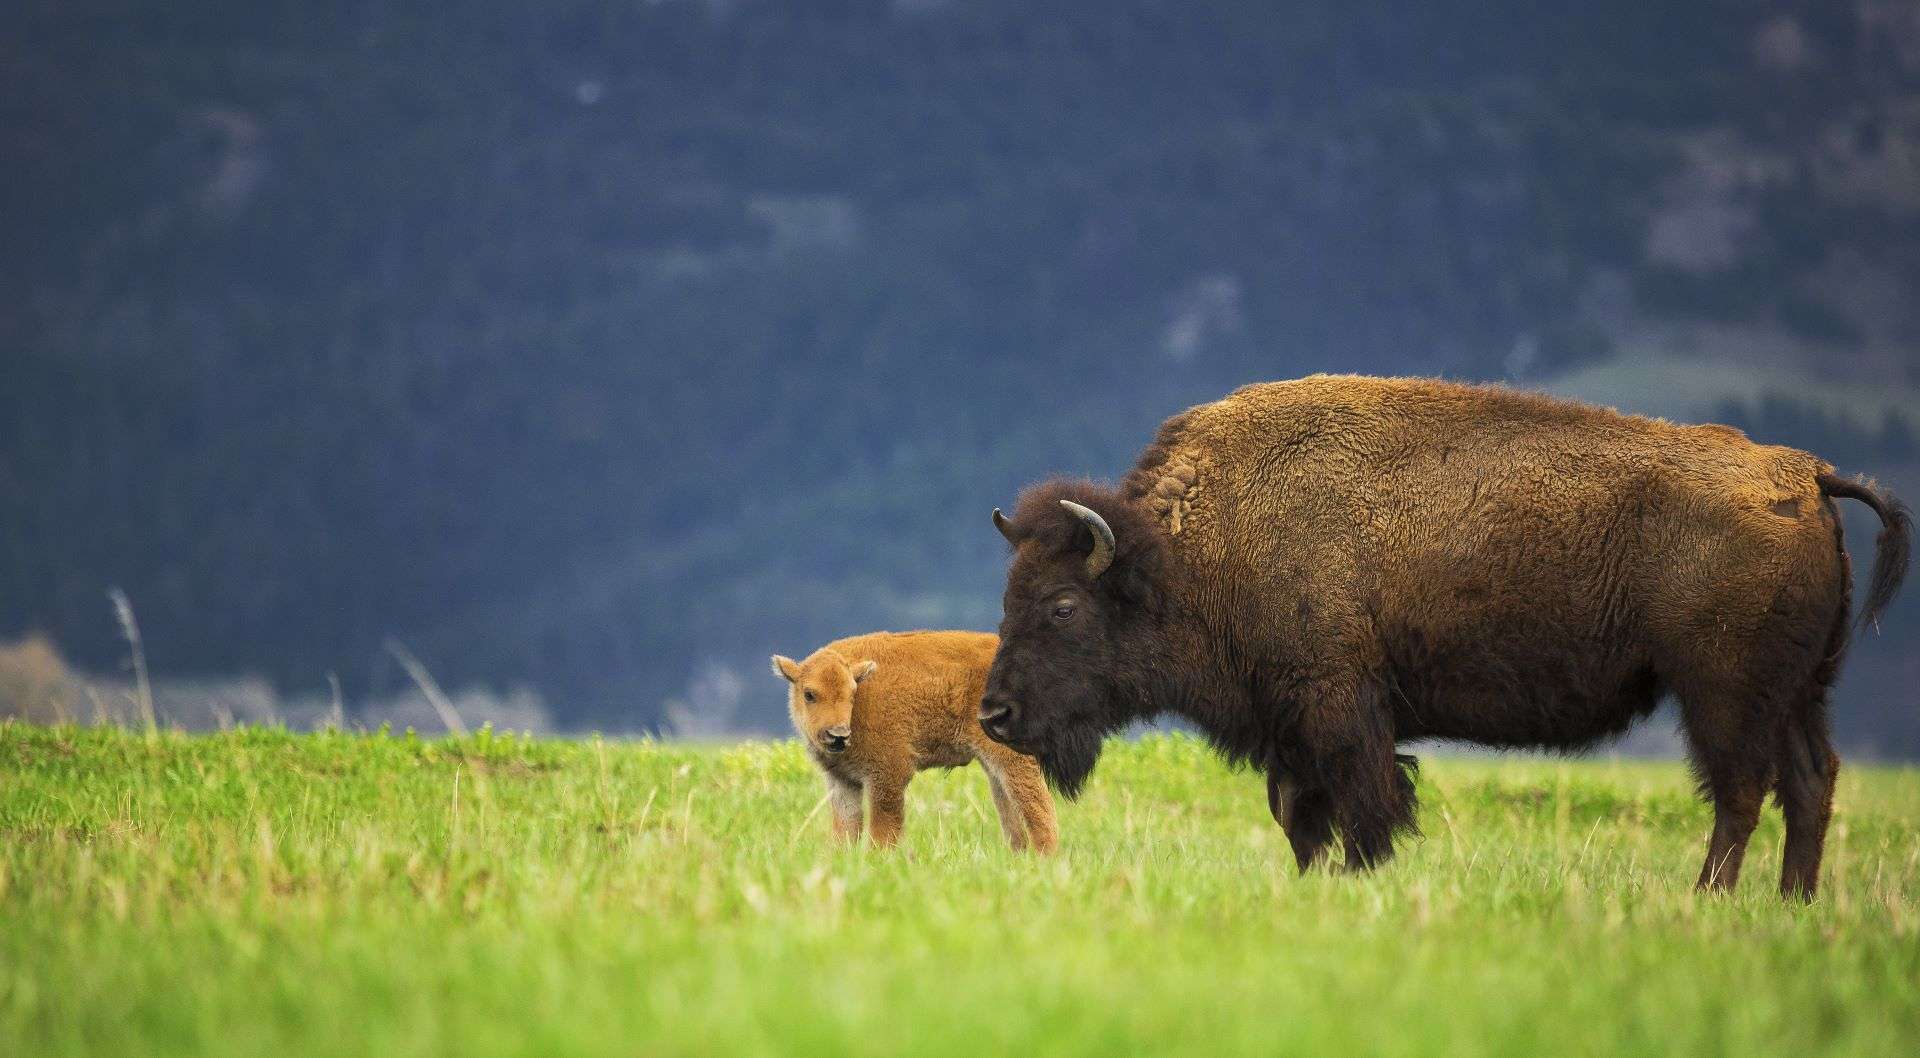 Mother bison cow with baby